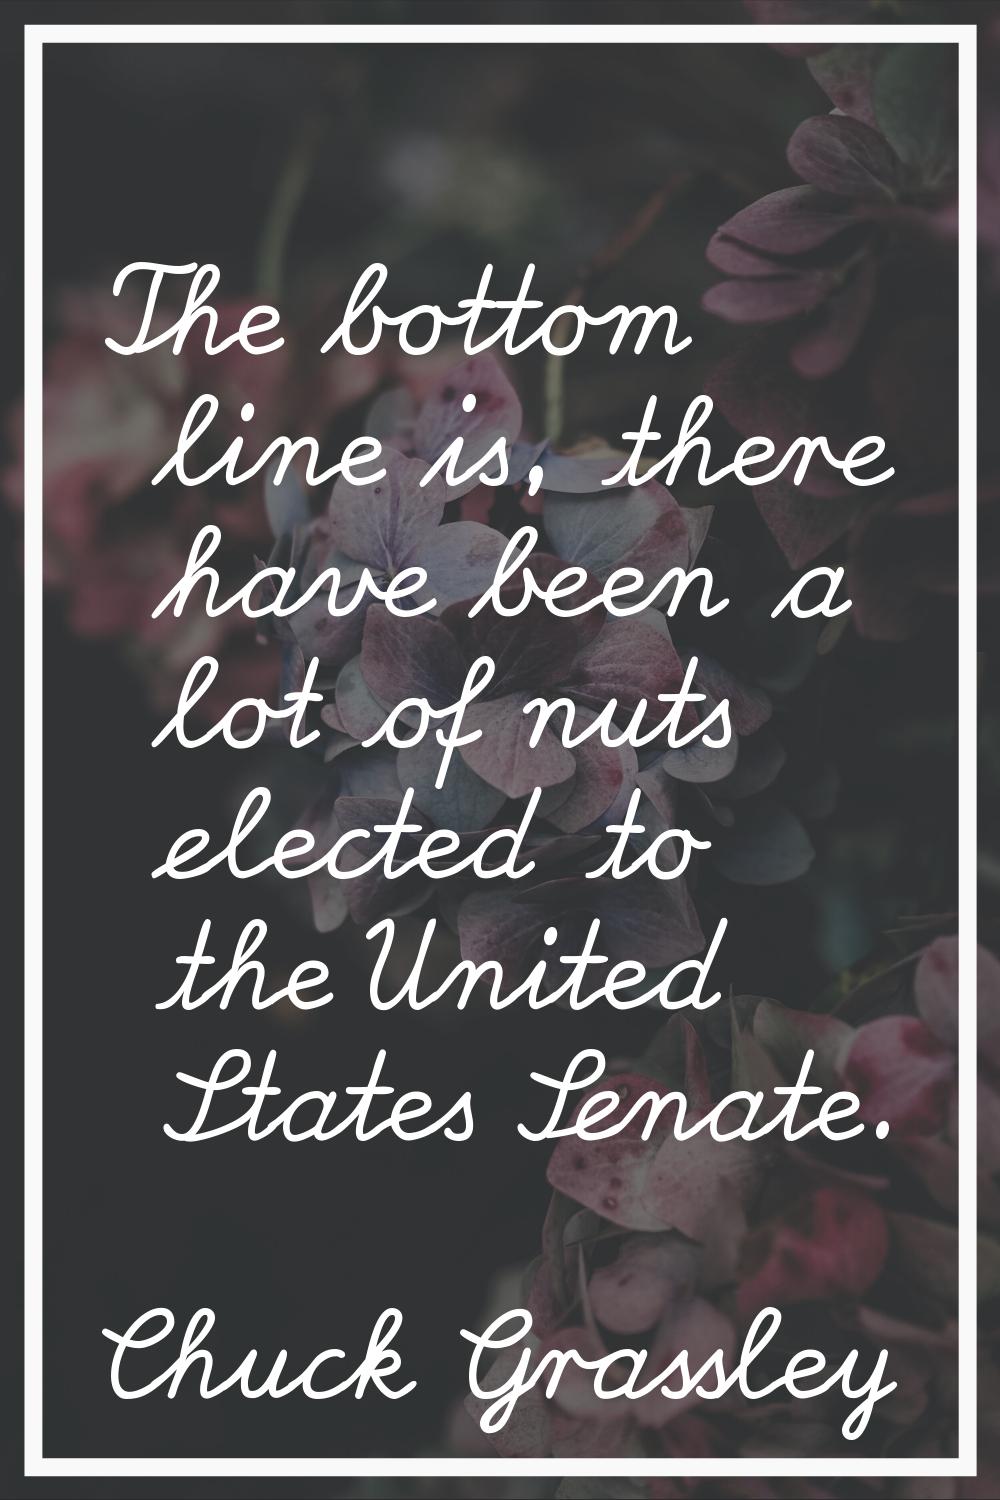 The bottom line is, there have been a lot of nuts elected to the United States Senate.